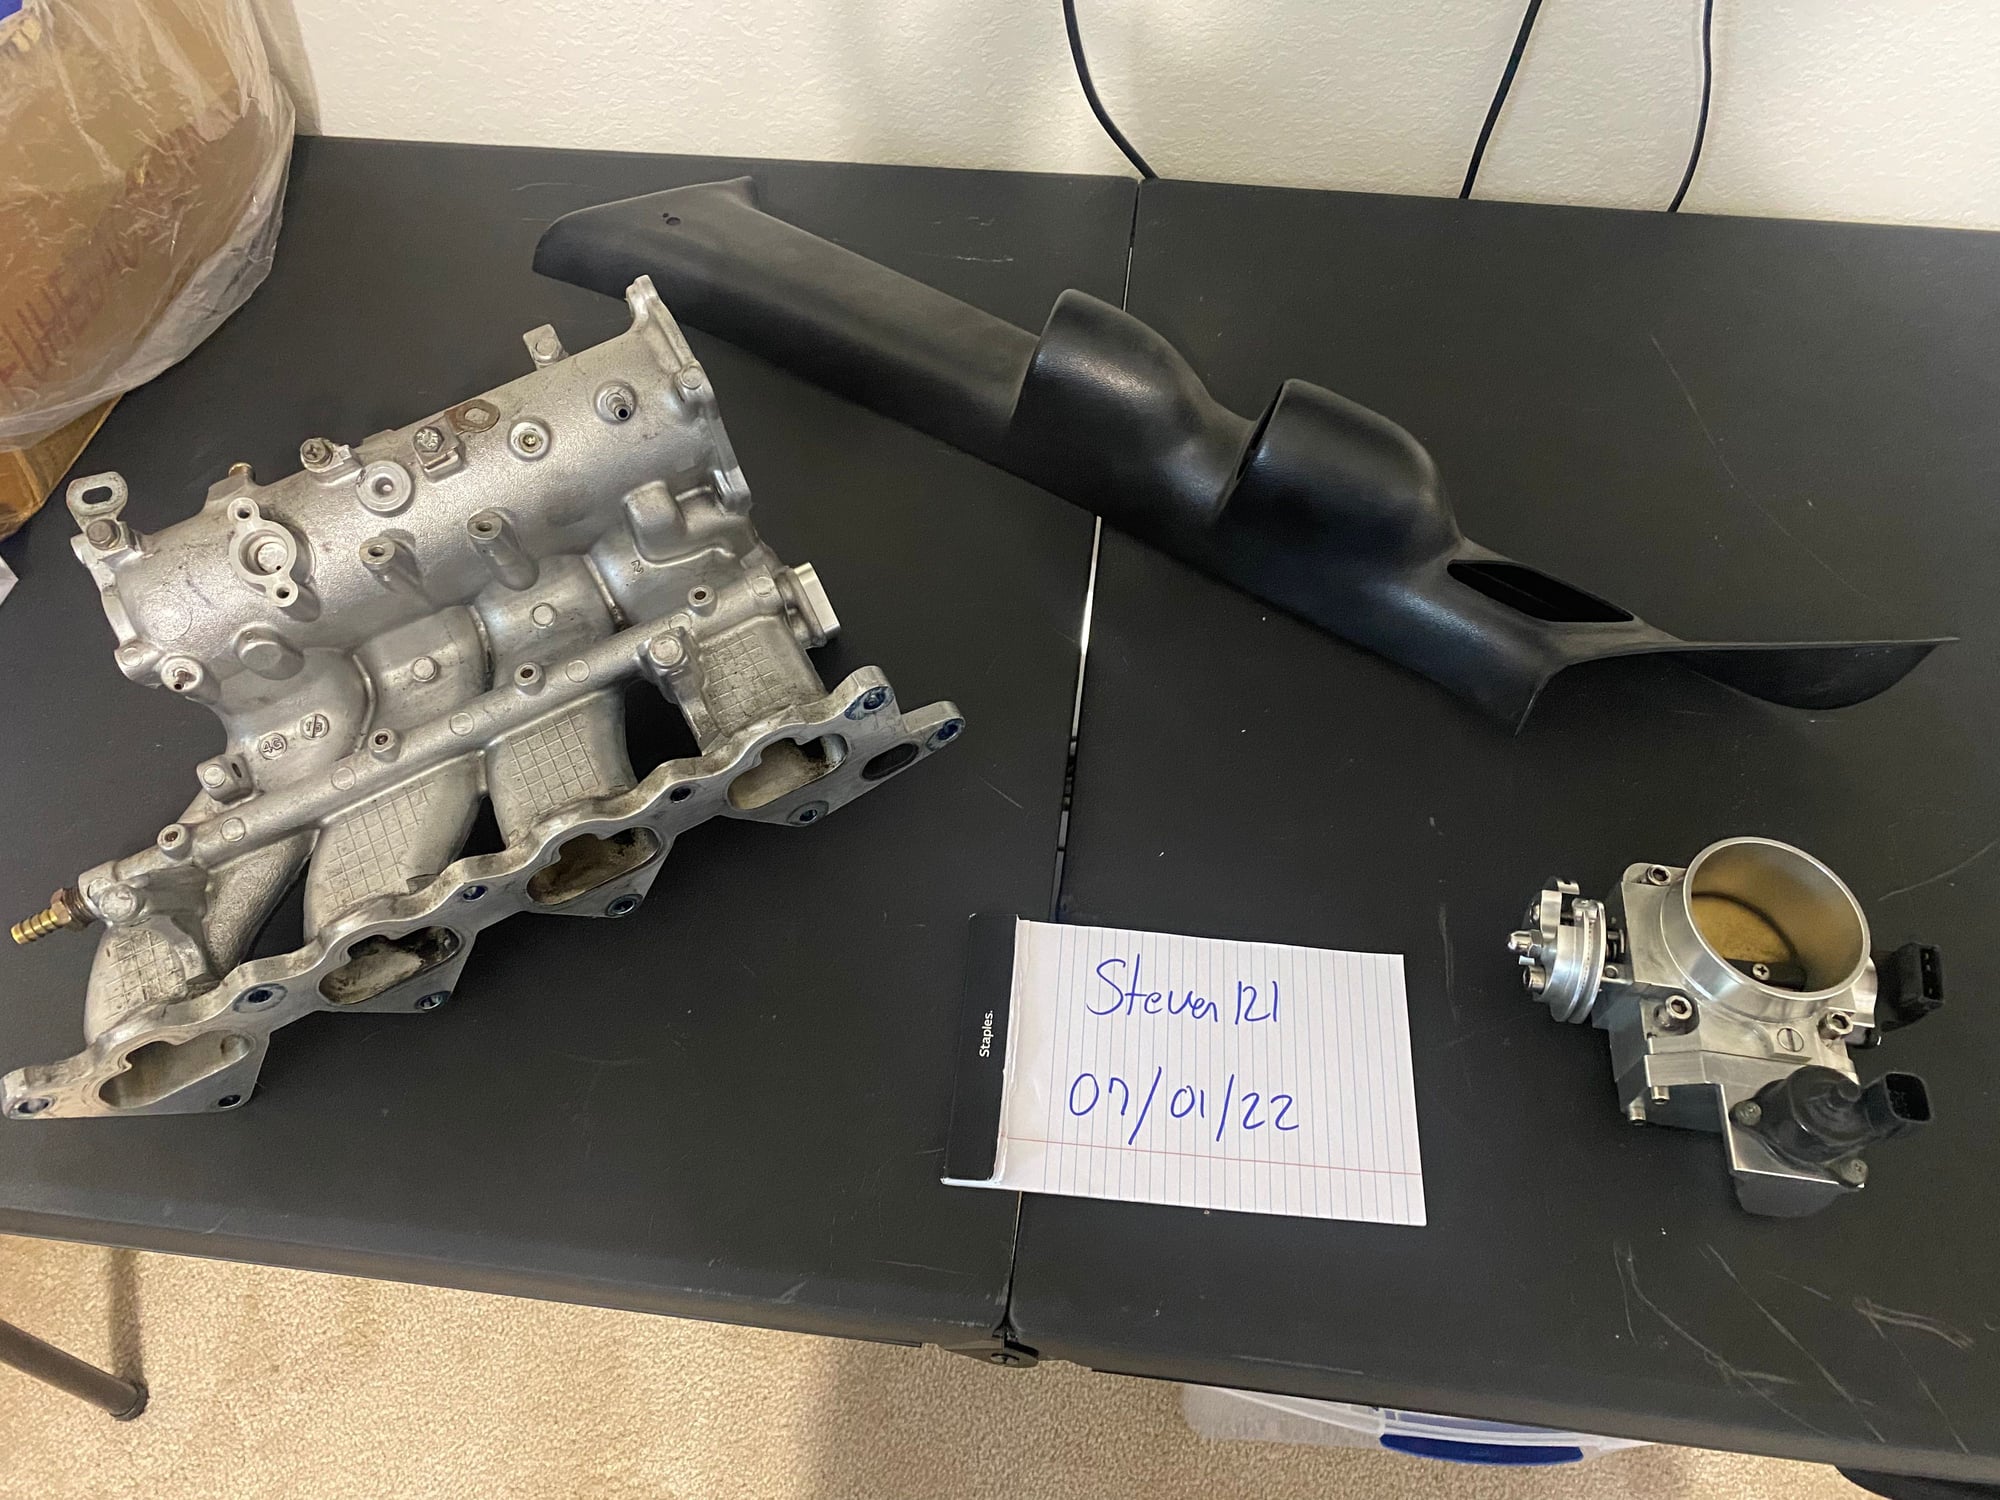 Engine - Intake/Fuel - Evo 8/9 Parts | Free Shipping | Better Offers - Used - 0  All Models - Plano, TX 75025, United States